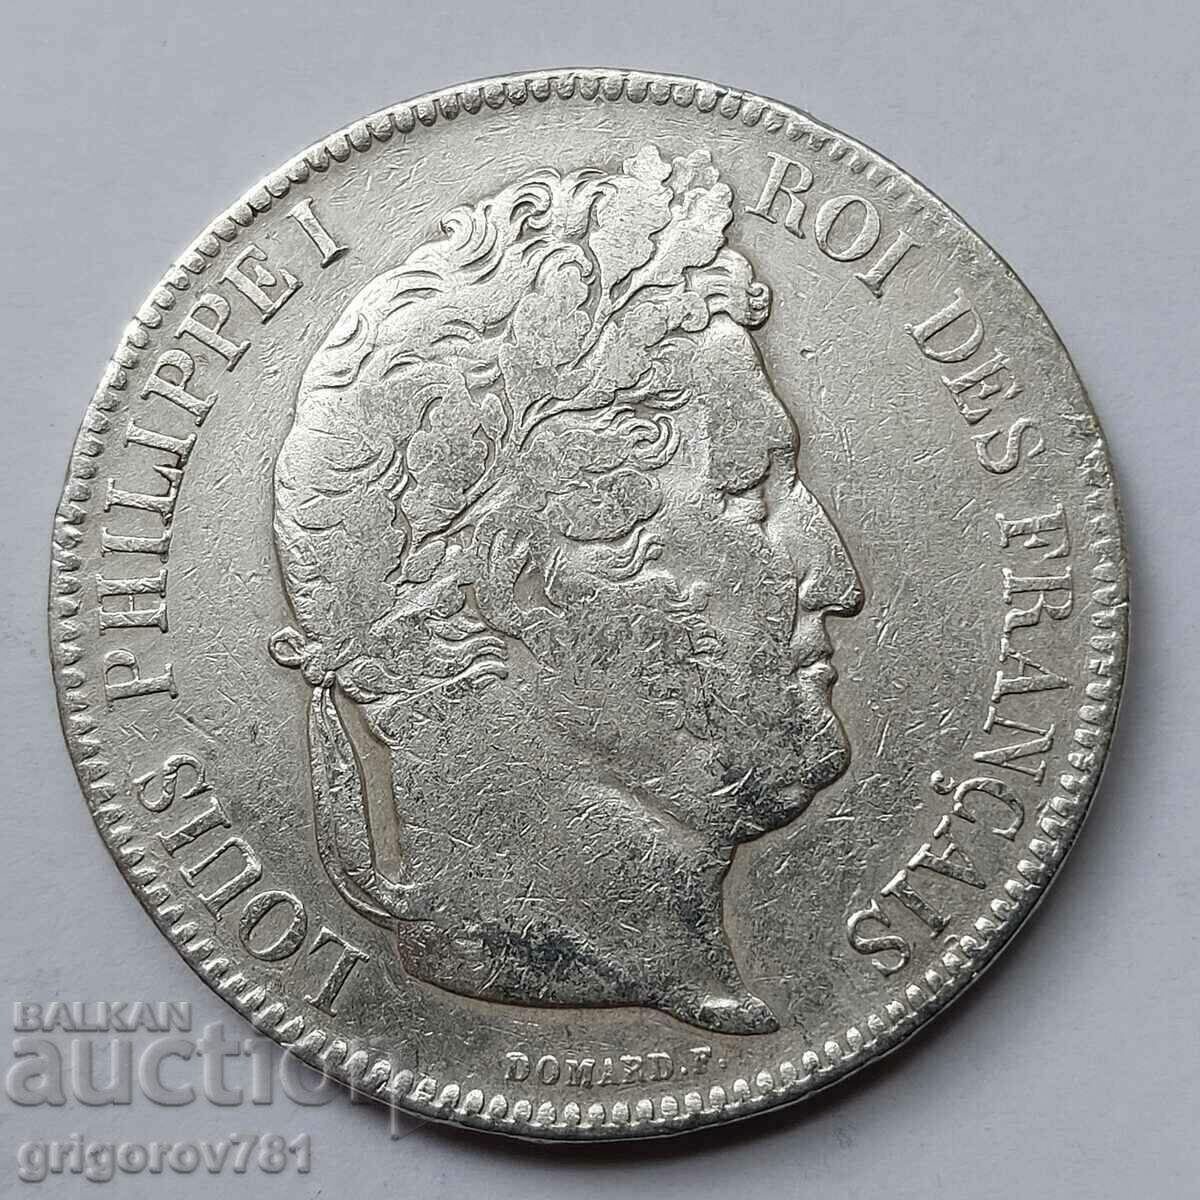 5 Francs Silver France 1842 W - Silver Coin #123